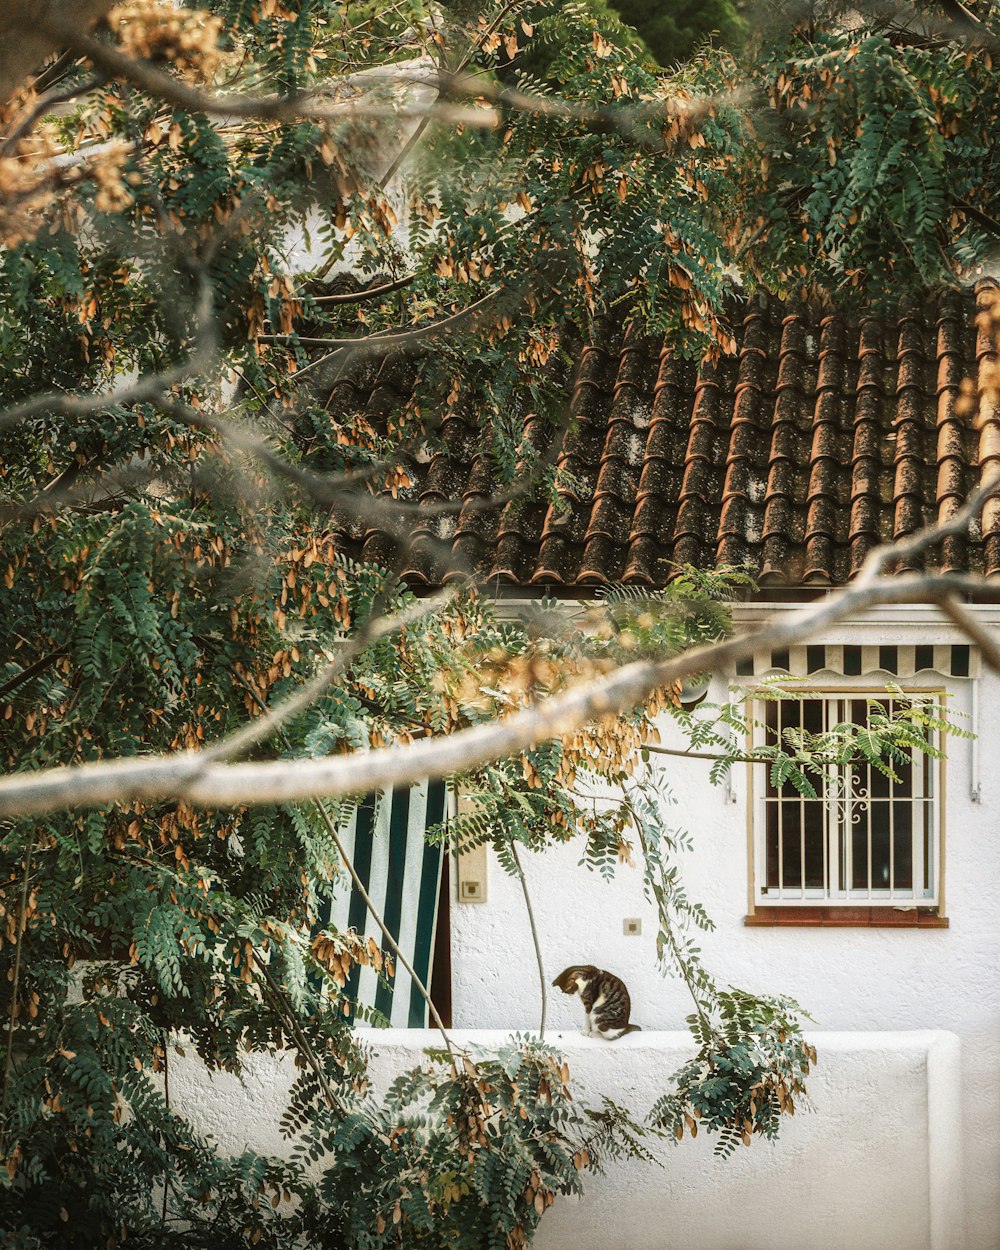 a cat sitting on a window sill next to a tree